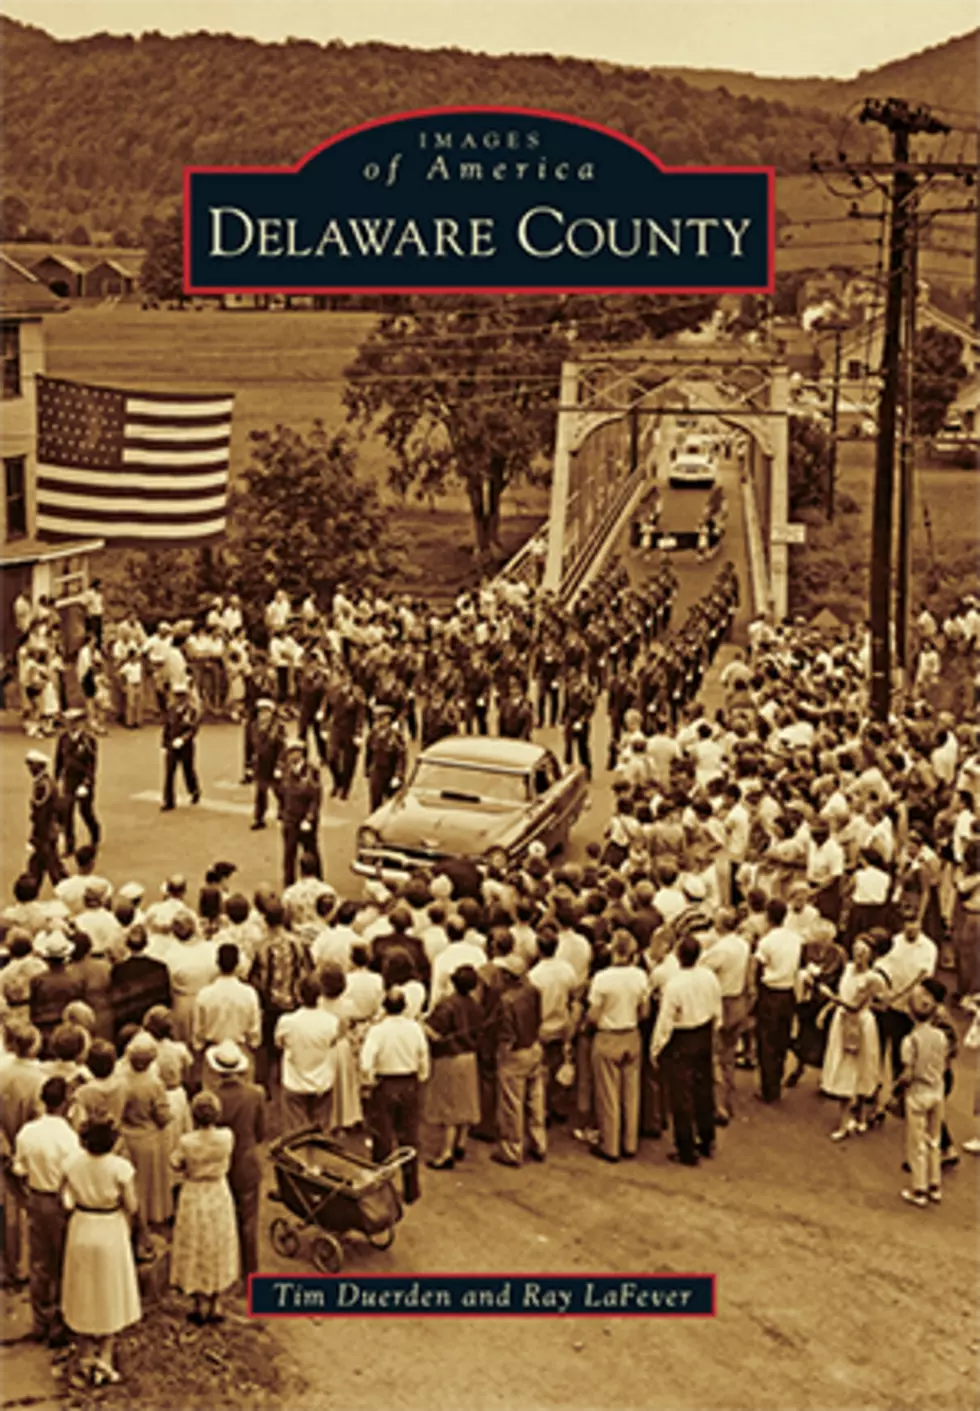 Enter Here to Win New Delaware County History Book!